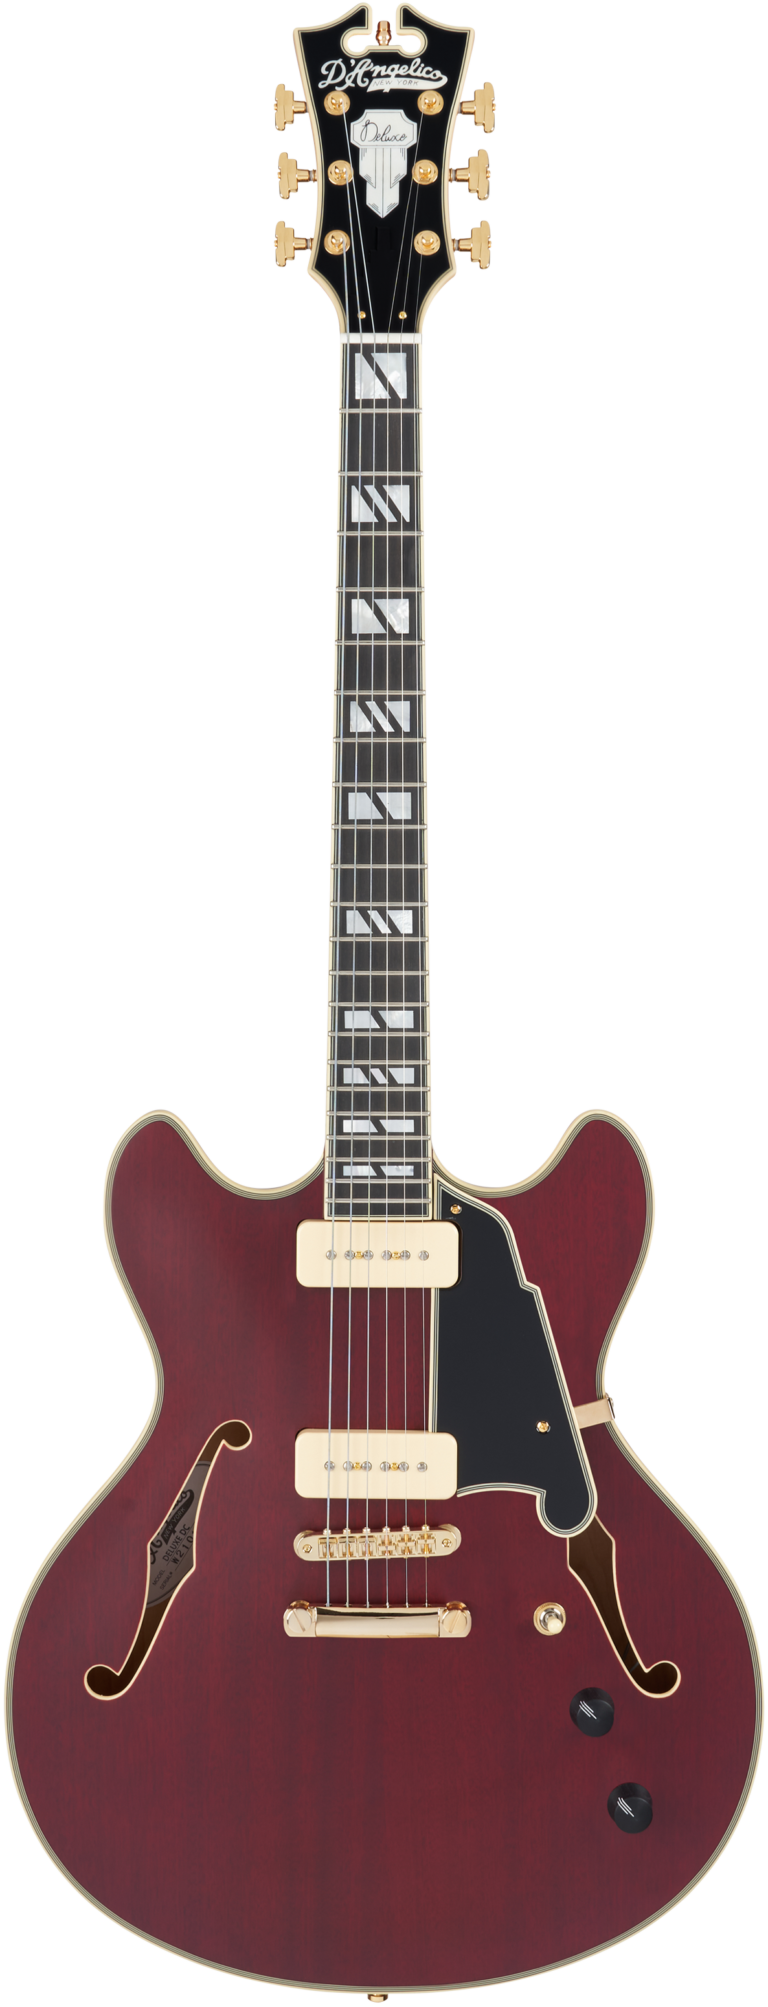 D'Angelico DELUXE DC Semi Hollow-Body Electric Guitar (Satin Trans Wine)